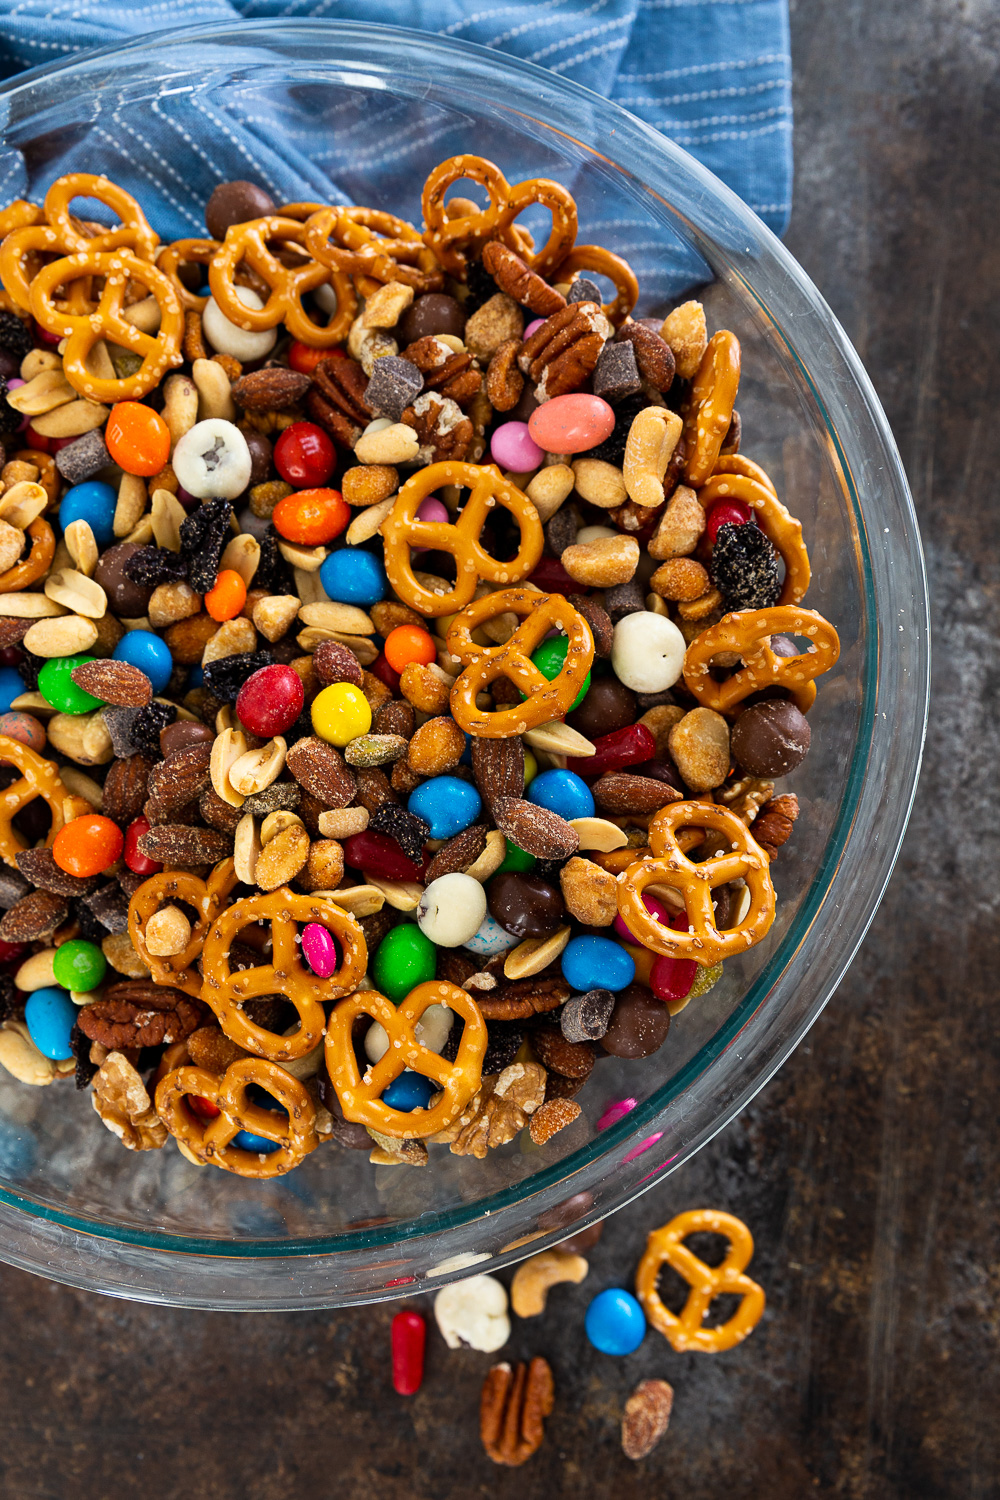 A big bowl of homemade trail mix, the perfect snack for your adventures.